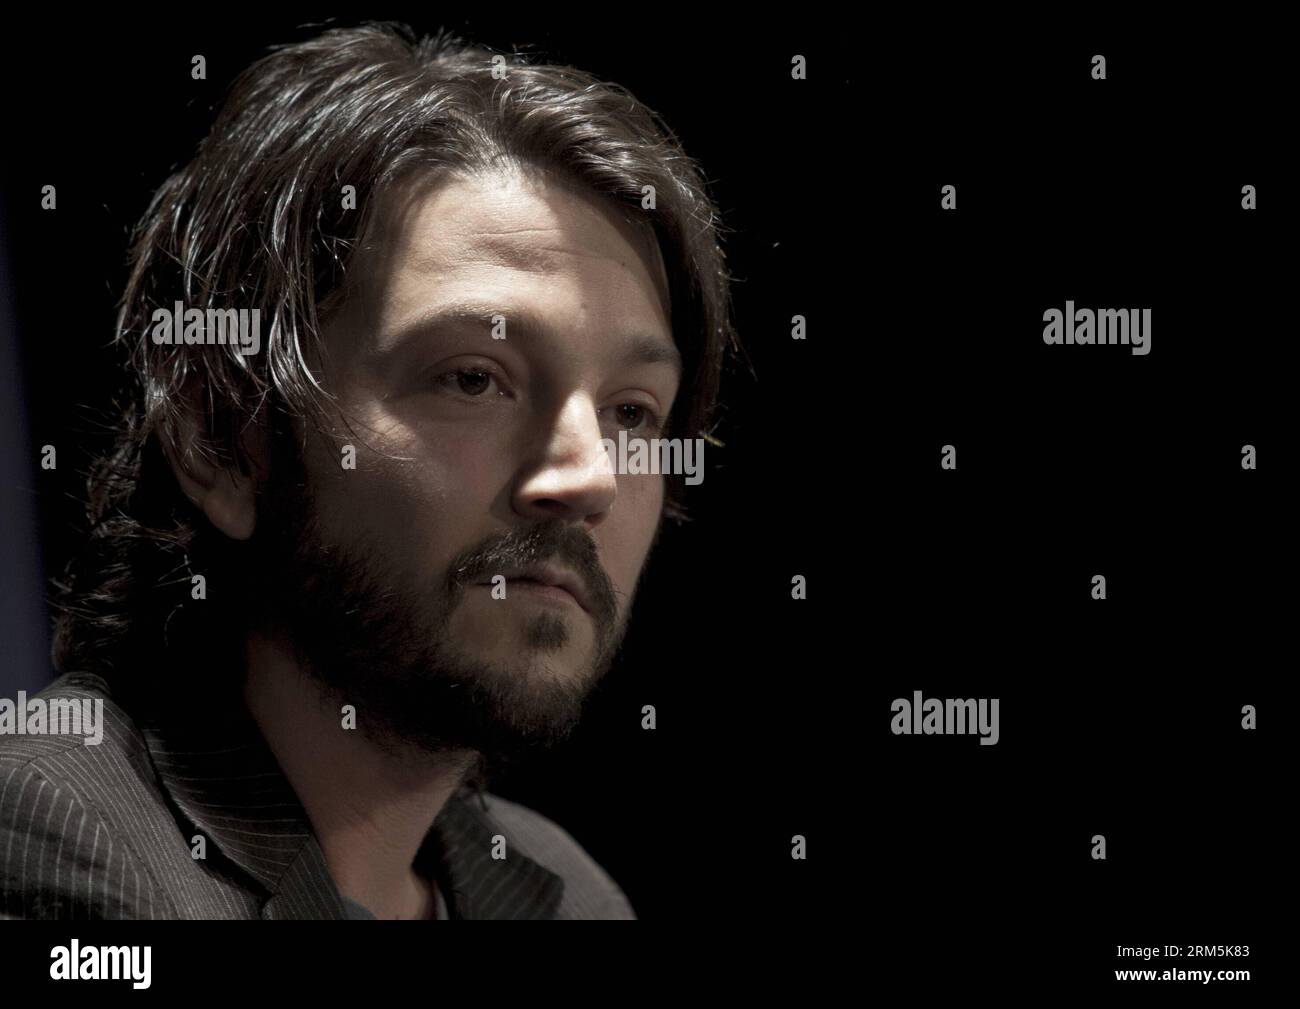 Bildnummer: 60679954  Datum: 05.11.2013  Copyright: imago/Xinhua MEXICO CITY, Nov. 5, 2013 (Xinhua) -- Mexican actor Diego Luna reacts during a press conference to announce his participation in the theater play Cada Vez Nos Despedimos Mejor , in Mexico City, capital of Mexico, on Nov. 5, 2013. (Xinhua/Alejandro Ayala) MEXICO-MEXICO CITY-ENTERTAINMENT-DIEGO LUNA PUBLICATIONxNOTxINxCHN Entertainment People x0x xkg 2013 quer     60679954 Date 05 11 2013 Copyright Imago XINHUA Mexico City Nov 5 2013 XINHUA MEXICAN Actor Diego Luna reacts during a Press Conference to Announce His participation in T Stock Photo